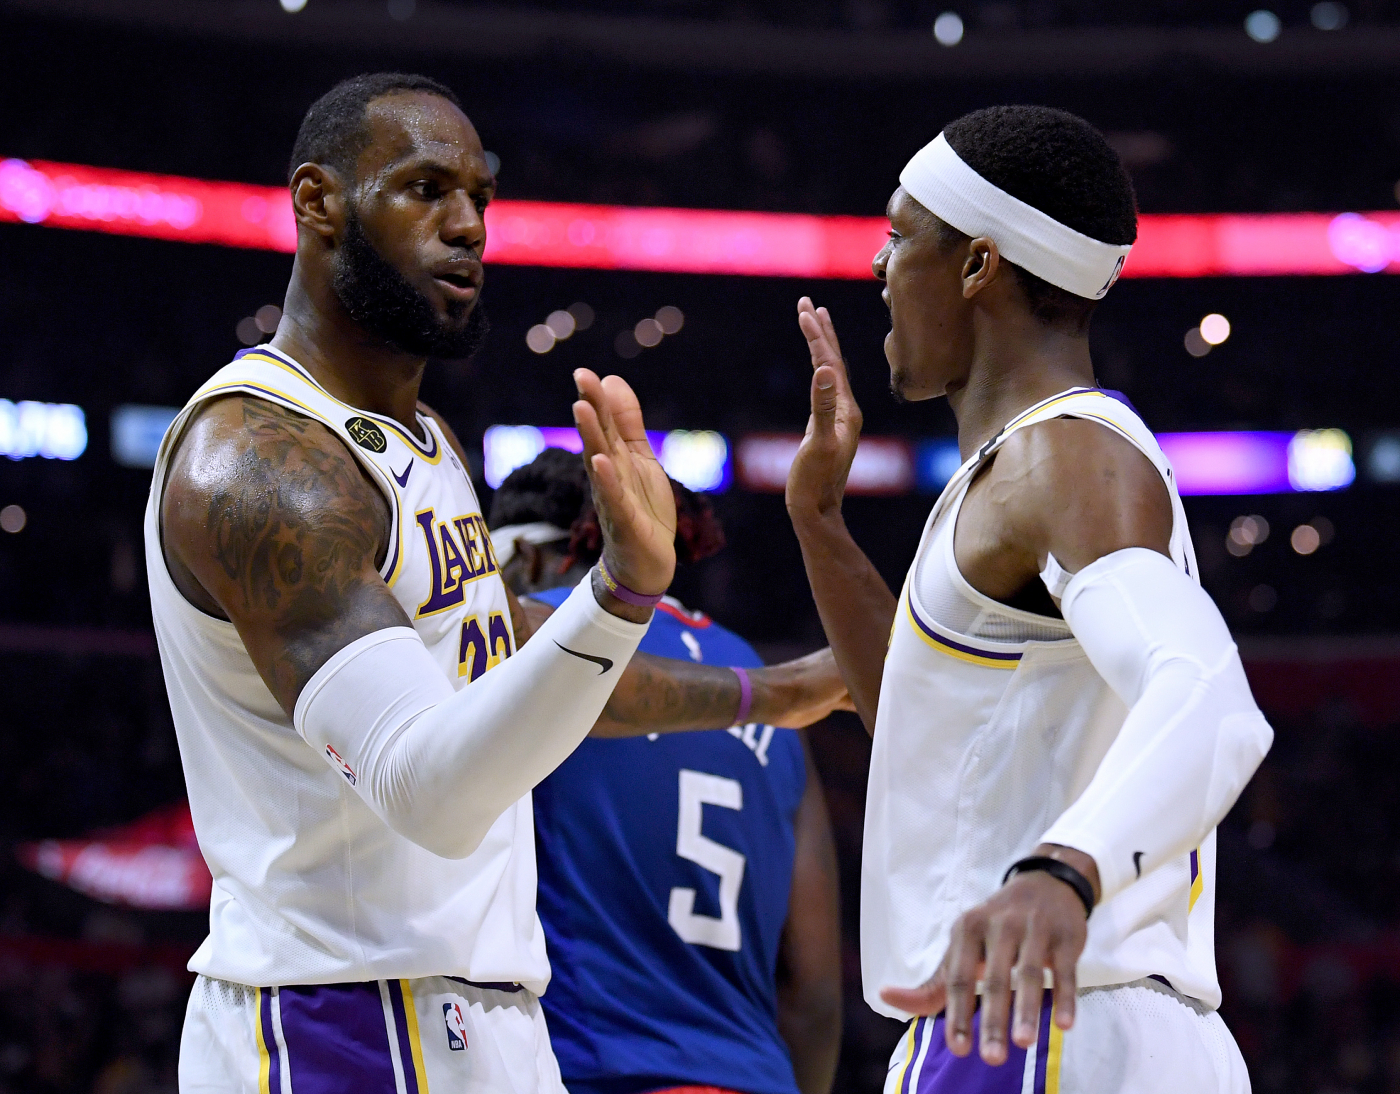 Rajon Rondo has proven to be an extremely valuable piece for the Lakers. He even proved it once by confronting LeBron James.